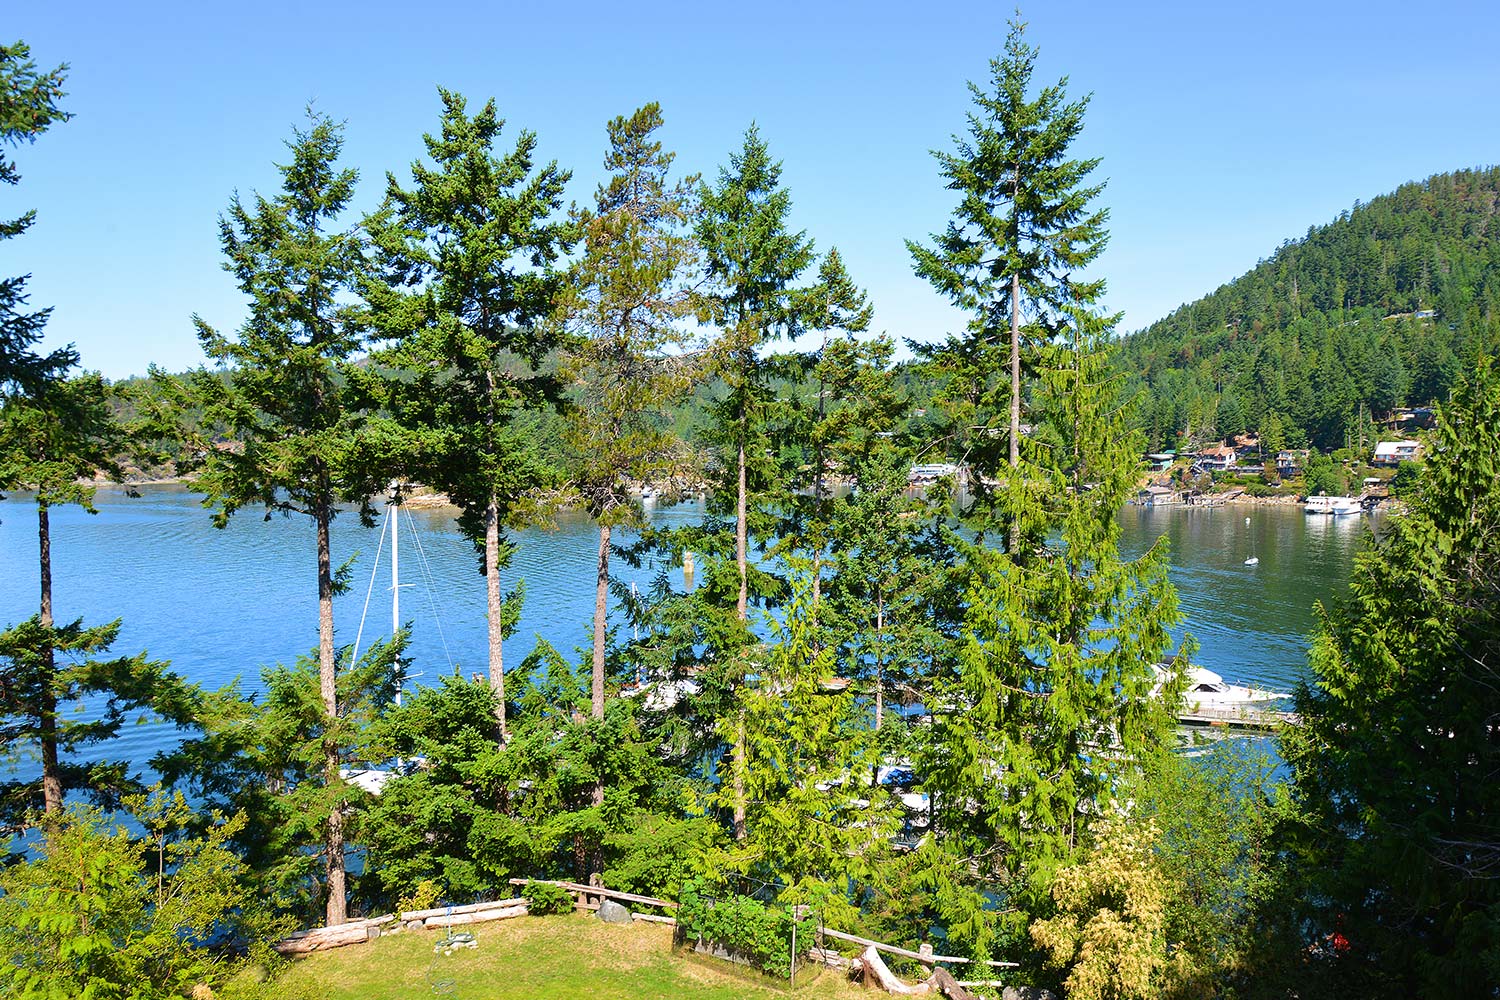 Stunning views of Pender Harbour and tall trees from upstairs of House 65 at John Henry’s Marina & Resort.